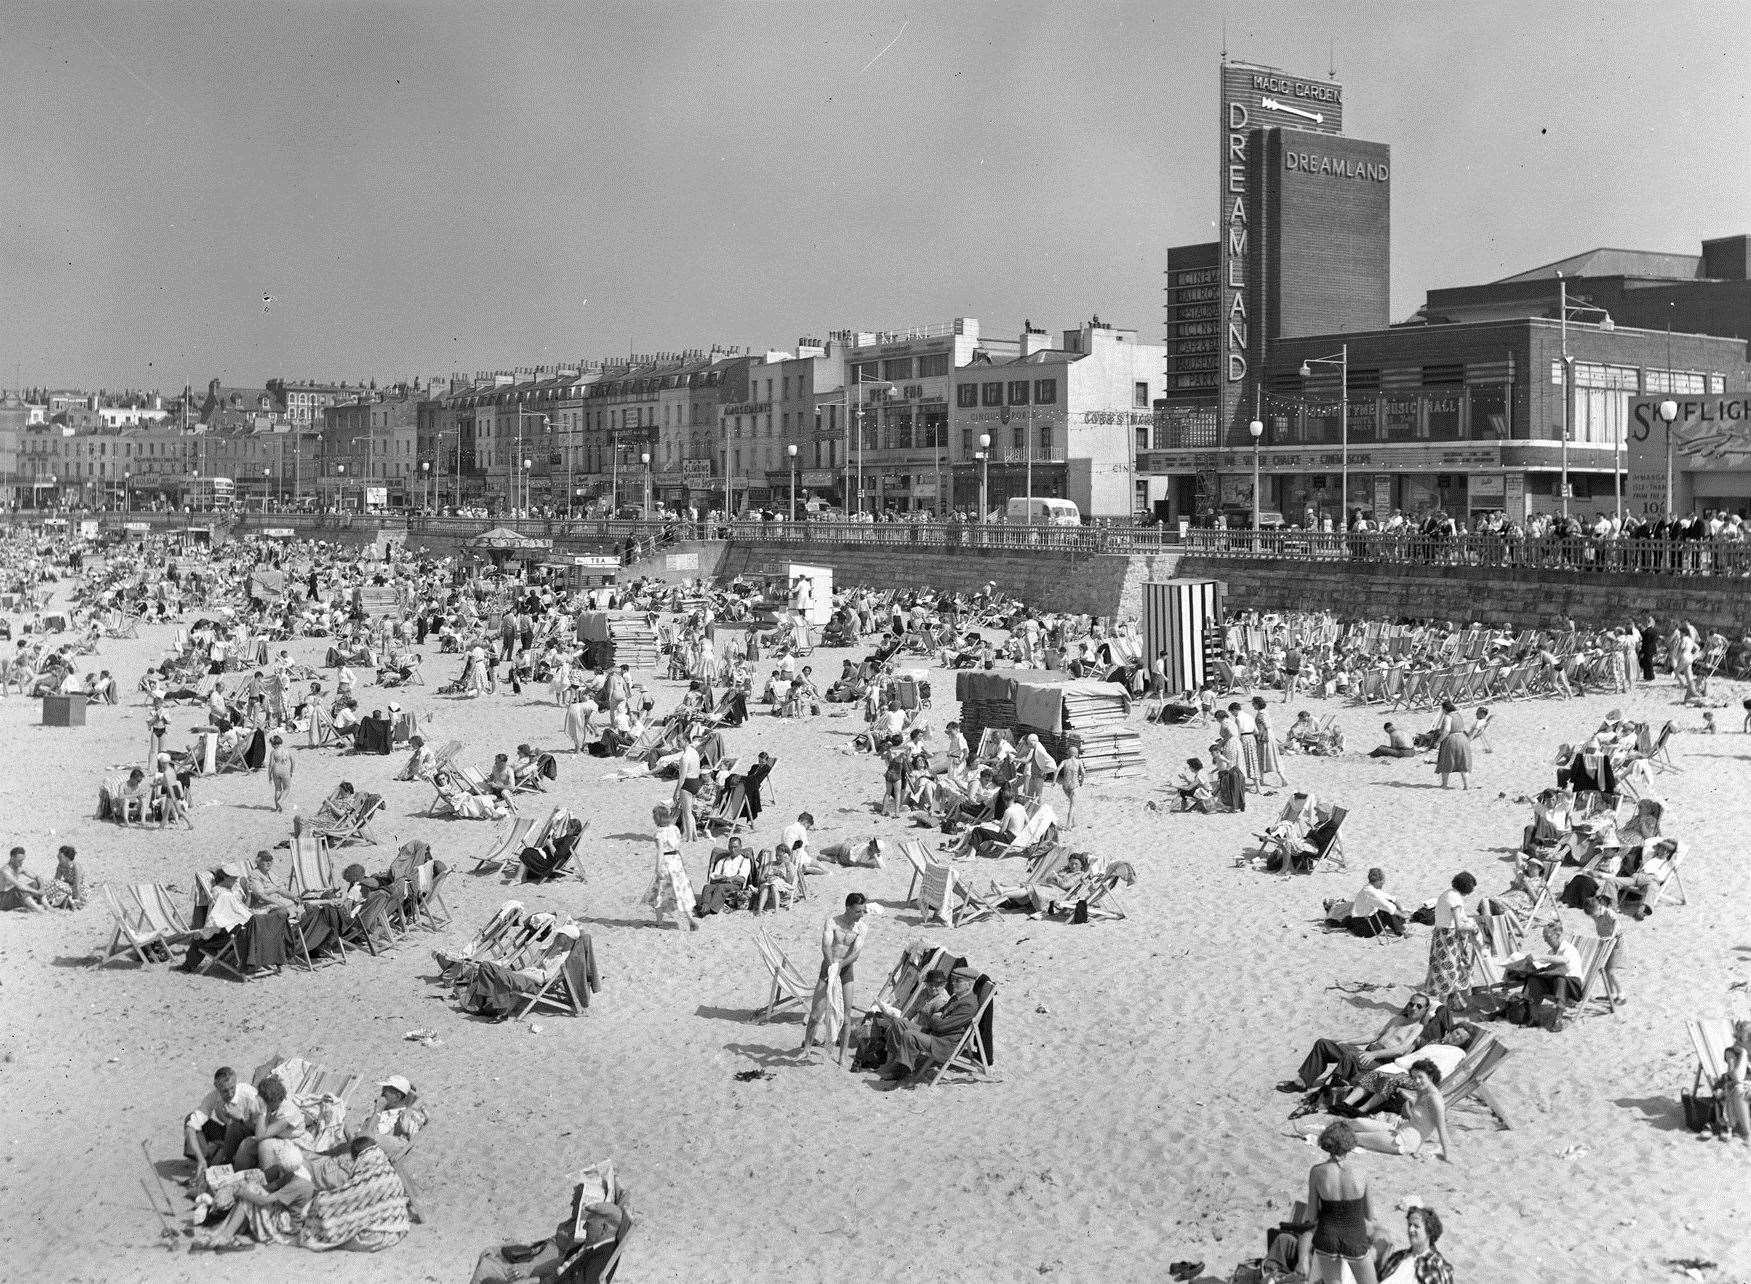 Margate built its fortunes on its popularity as a resort. Picture: Thanet District Council